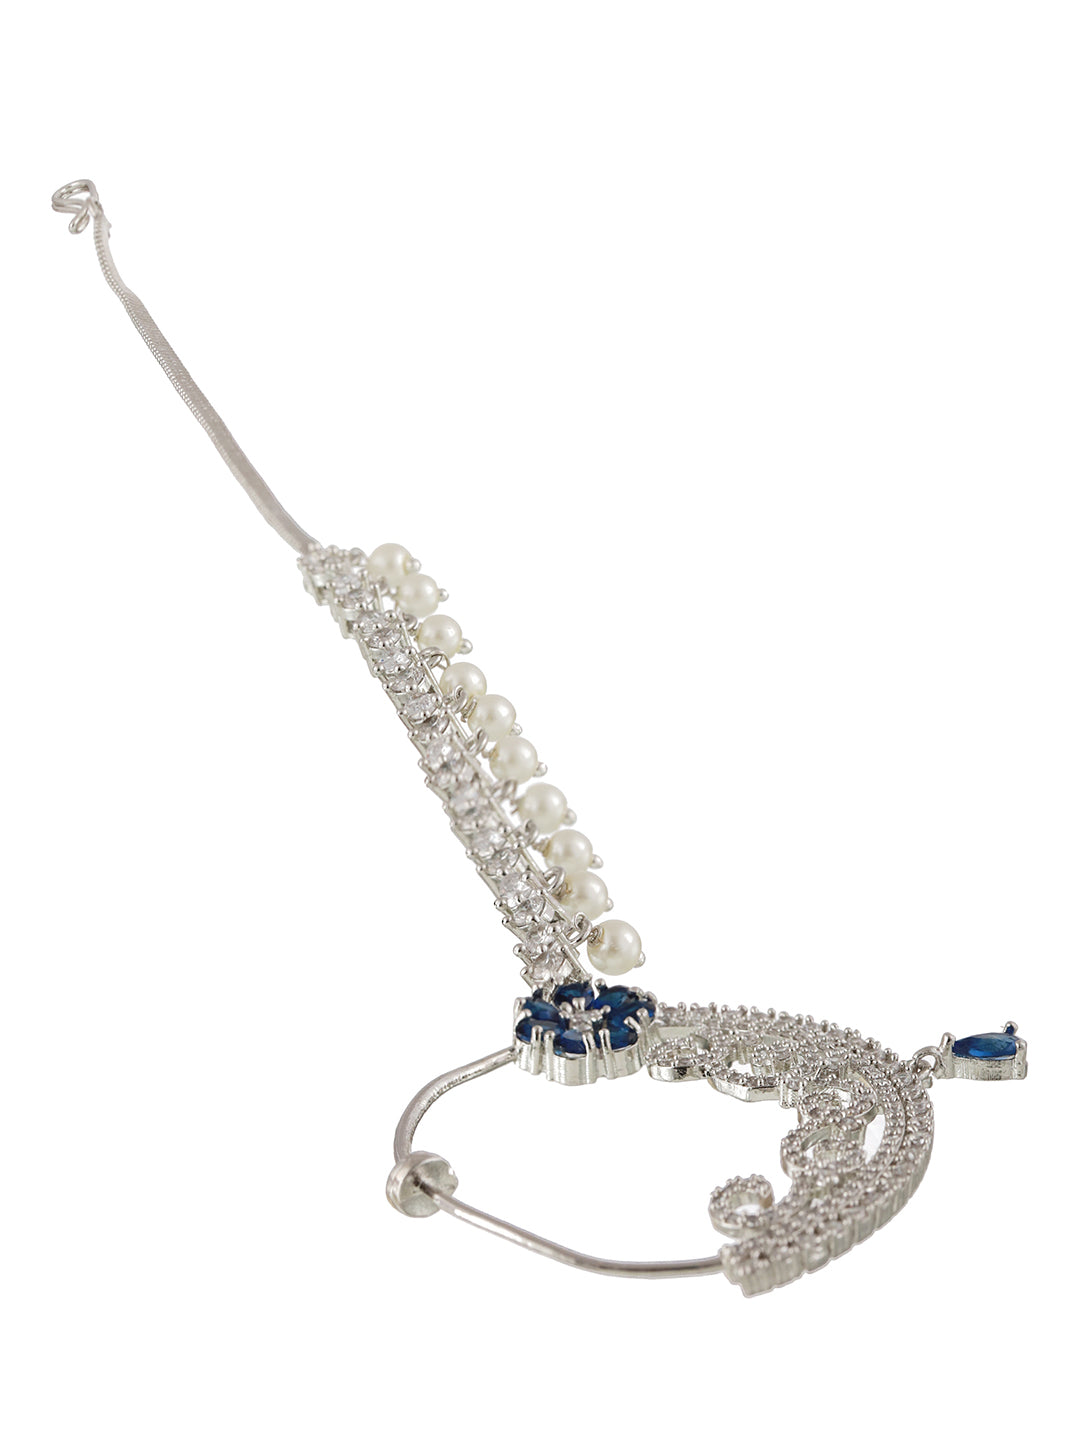 Silver Plated Blue Floral American Diamond Studded Handcrafted Nose Ring With Pearl Drop Chain - Jazzandsizzle